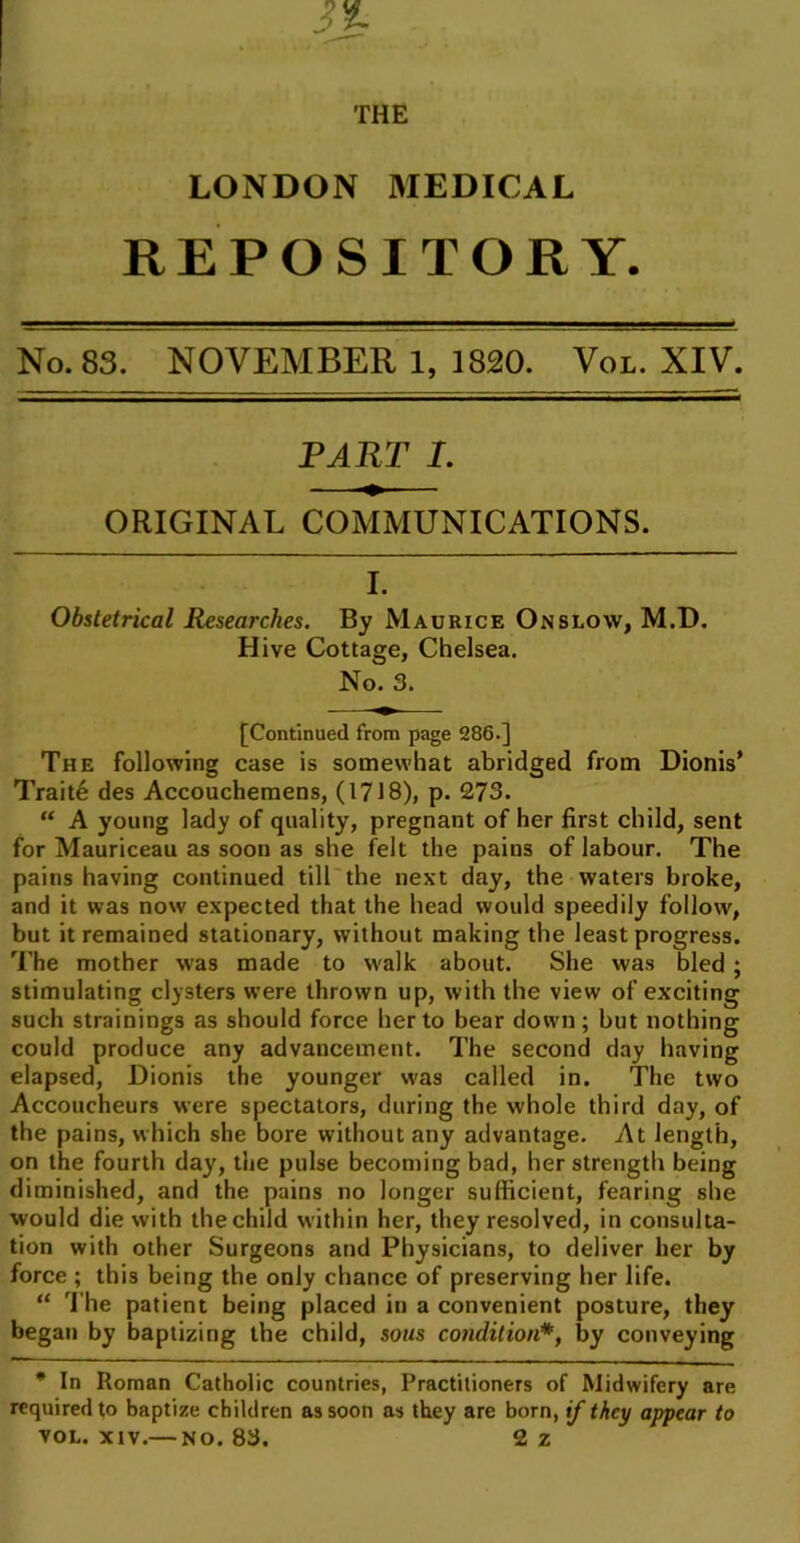 3% THE LONDON MEDICAL REPOSITORY. No. 83. NOVEMBER 1, 1820. Vol. XIV. PART L ORIGINAL COMMUNICATIONS. I. Obstetrical Researches. By Maurice Onslow, M.D. Hive Cottage, Chelsea. No. 3. [Continued from page 286.] The following case is somewhat abridged from Dionis* Traiffi des Accoucheraens, (1718), p. 273. “ A young lady of quality, pregnant of her first child, sent for Mauriceau as soon as she felt the pains of labour. The pains having continued till the next day, the waters broke, and it was now expected that the head would speedily follow, but it remained stationary, without making the least progress. The mother was made to walk about. She was bled; stimulating clysters were thrown up, with the view of exciting such strainings as should force her to bear down; but nothing could produce any advancement. The second day having elapsed, Dionis the younger was called in. The two Accoucheurs were spectators, during the whole third day, of the pains, which she bore without any advantage. At length, on the fourth day, the pulse becoming bad, her strength being diminished, and the pains no longer sufficient, fearing she would die with the child within her, they resolved, in consulta- tion with other Surgeons and Physicians, to deliver her by force ; this being the only chance of preserving her life. “ The patient being placed in a convenient posture, they began by baptizing the child, sous condition*, by conveying * In Roman Catholic countries, Practitioners of Midwifery are required to baptize children as soon as they are born, if they appear to VOL. XIV.— NO. 83. 2z